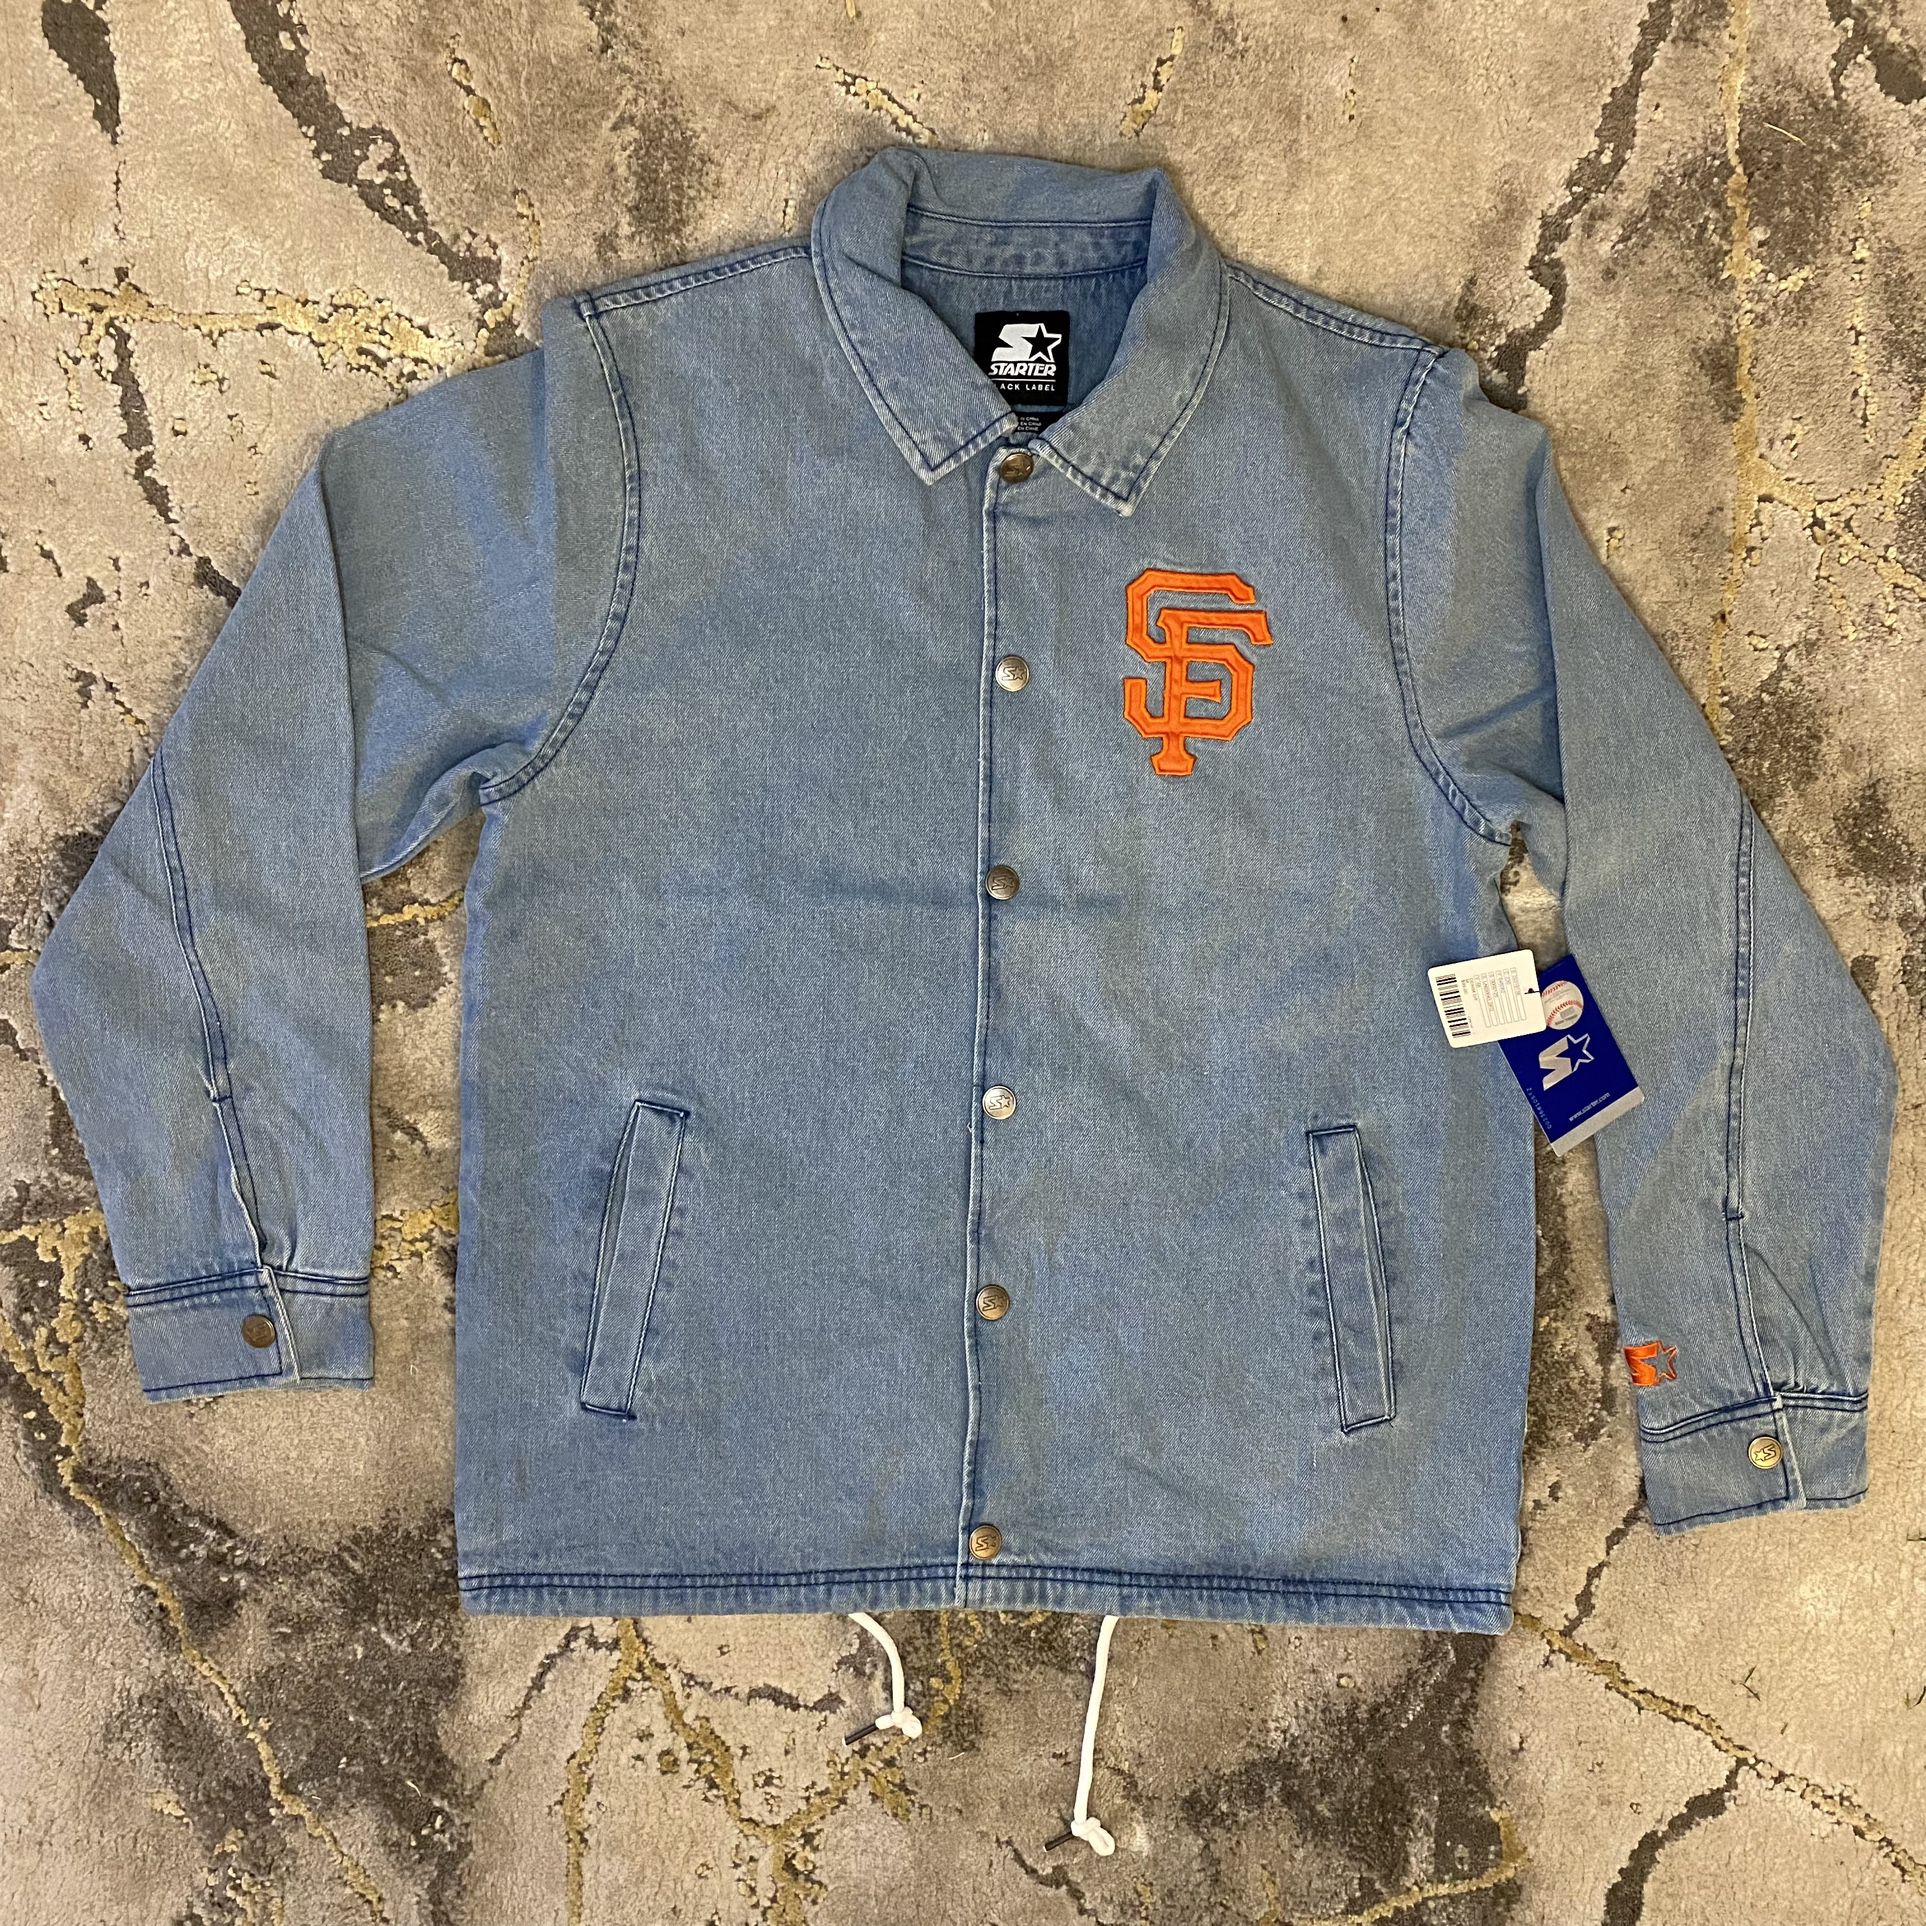 Starter San Francisco Giants Denim Button Jacket CP(contact info removed)0 Men's Size M